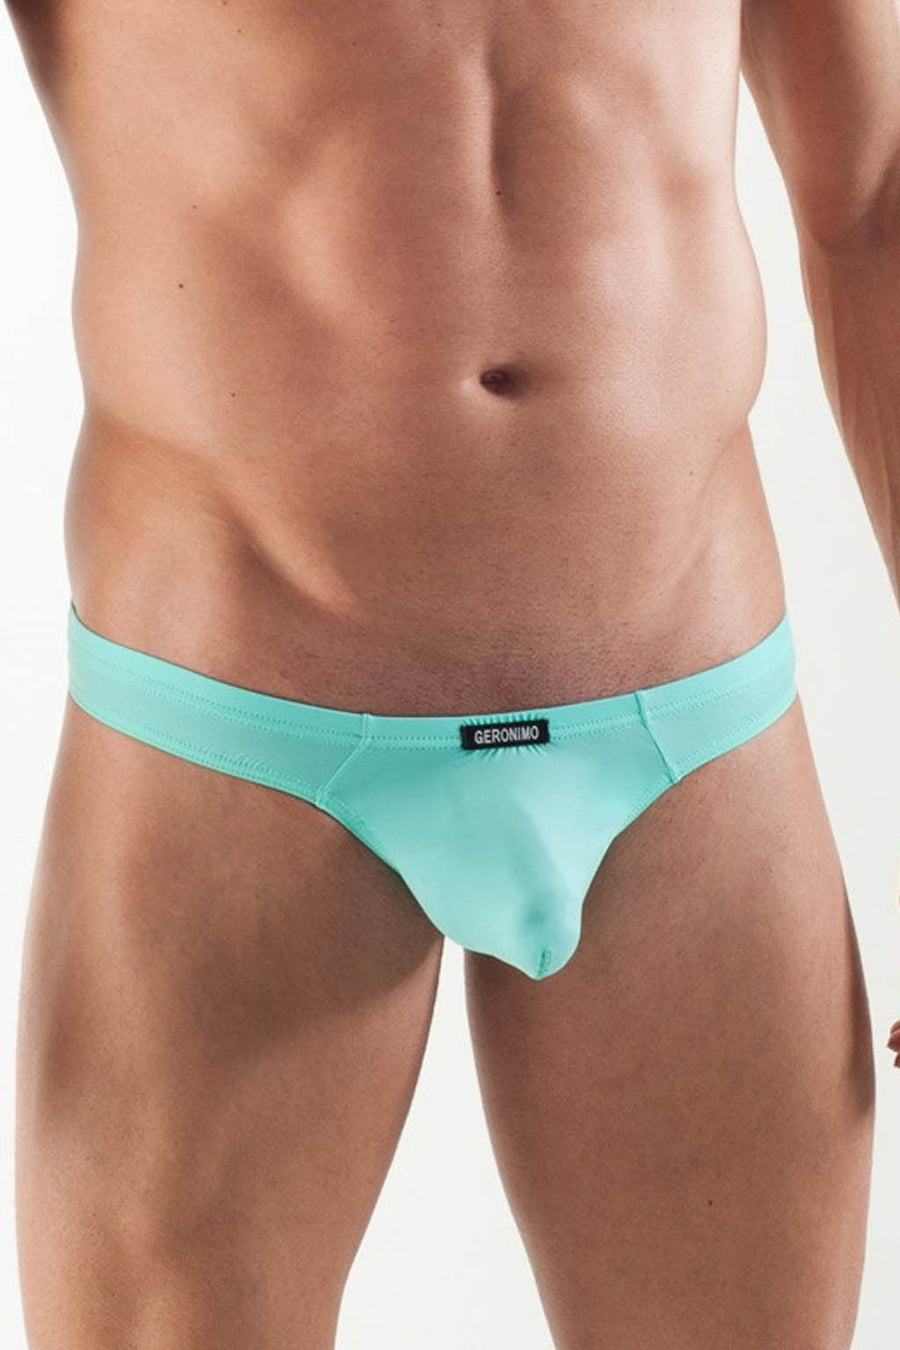 Geronimo Mens Pouch Thong G-string Underwear